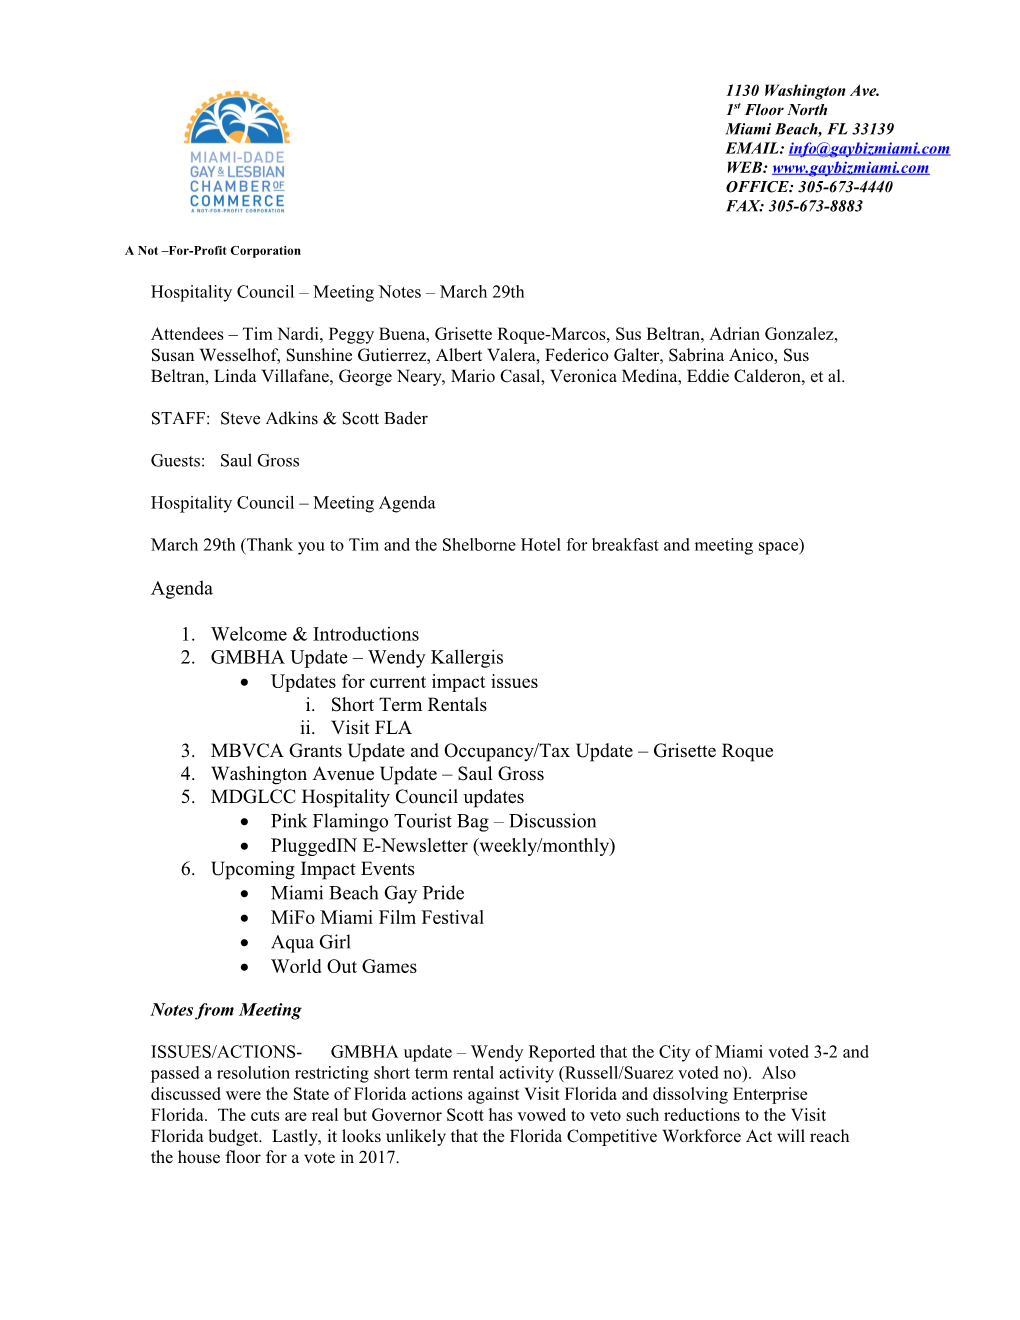 Hospitality Council Meeting Notes March 29Th